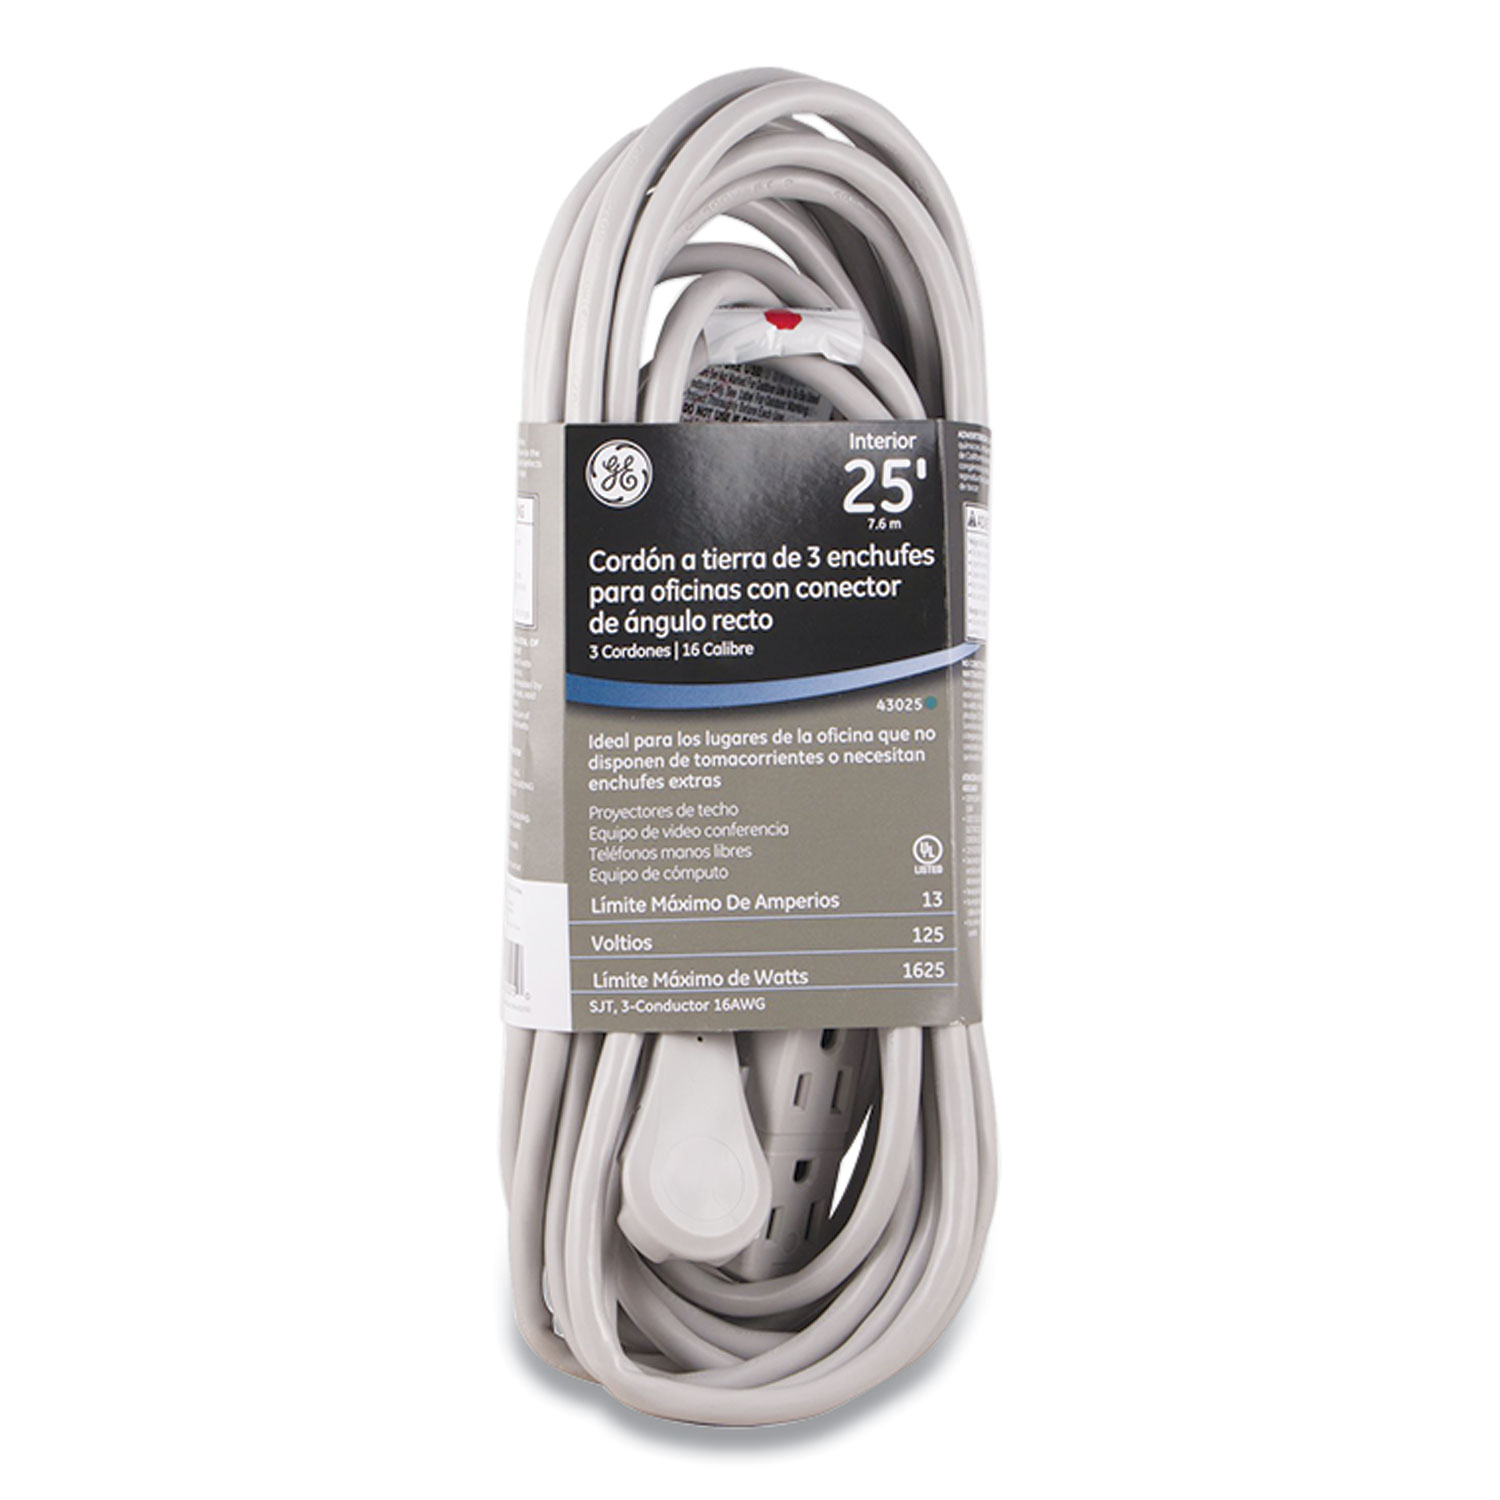  GE 51626/43025 Three Outlet Power Strip, 25 ft Cord, Gray (GEL517591) 